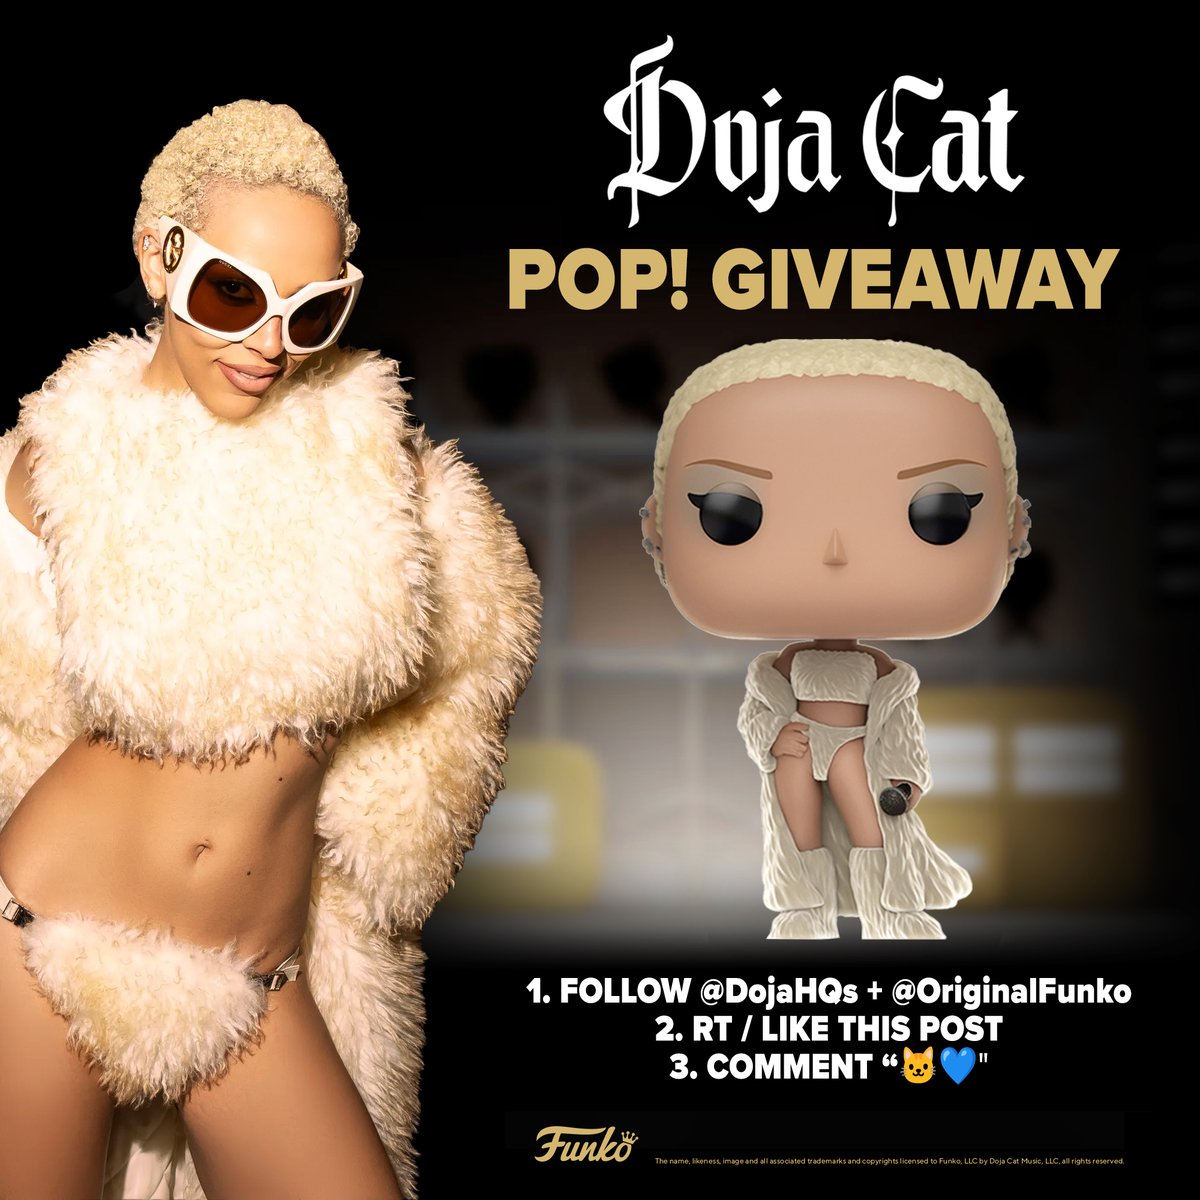 Partnered with FUNKO to give away the limited edition @DojaCat Pop! Open to US & International fans 🌎

Follow @DojaHQs + @OriginalFunko 
RT / Like this post
Comment '🐱💙' 

10 winners. Ends Friday, 4/19. Good luck!